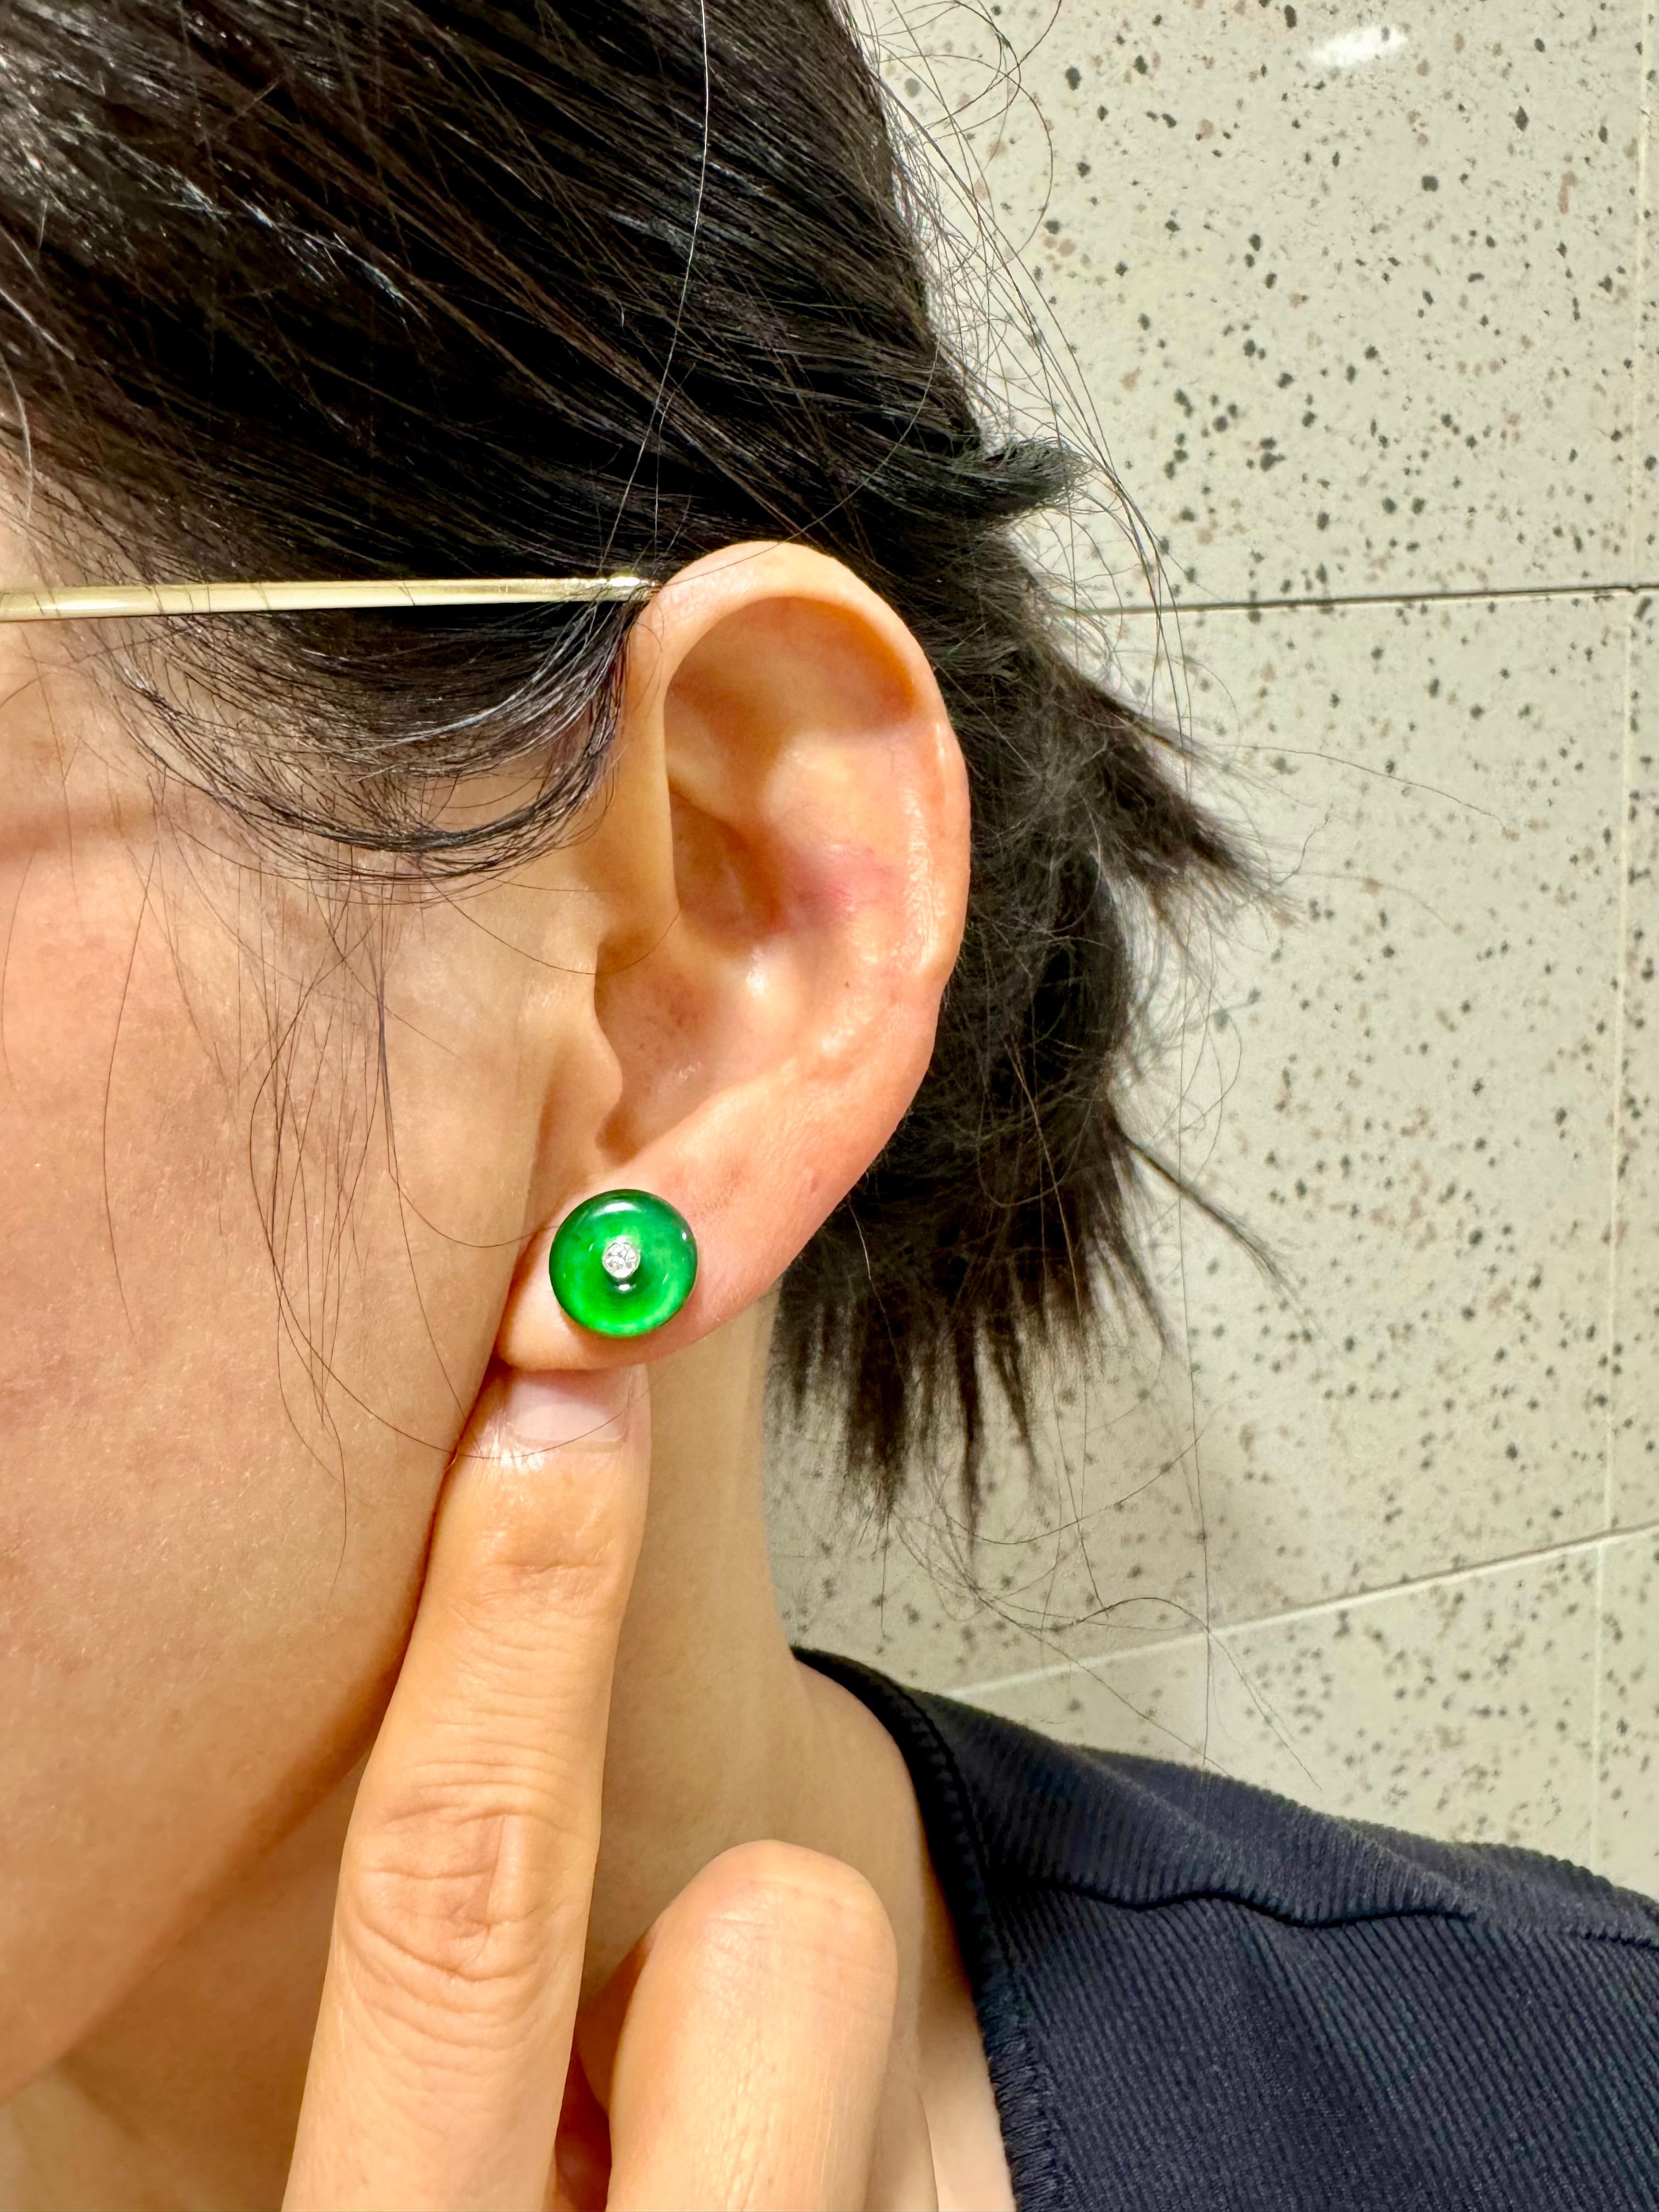 Please check out the HD video! It does not get much better than this! Here is a nice pair of imperial green Jade earrings. Each earring is about 11.3mm. The earrings are set in 18k white gold and diamonds. There are 2 diamonds in the middle of each